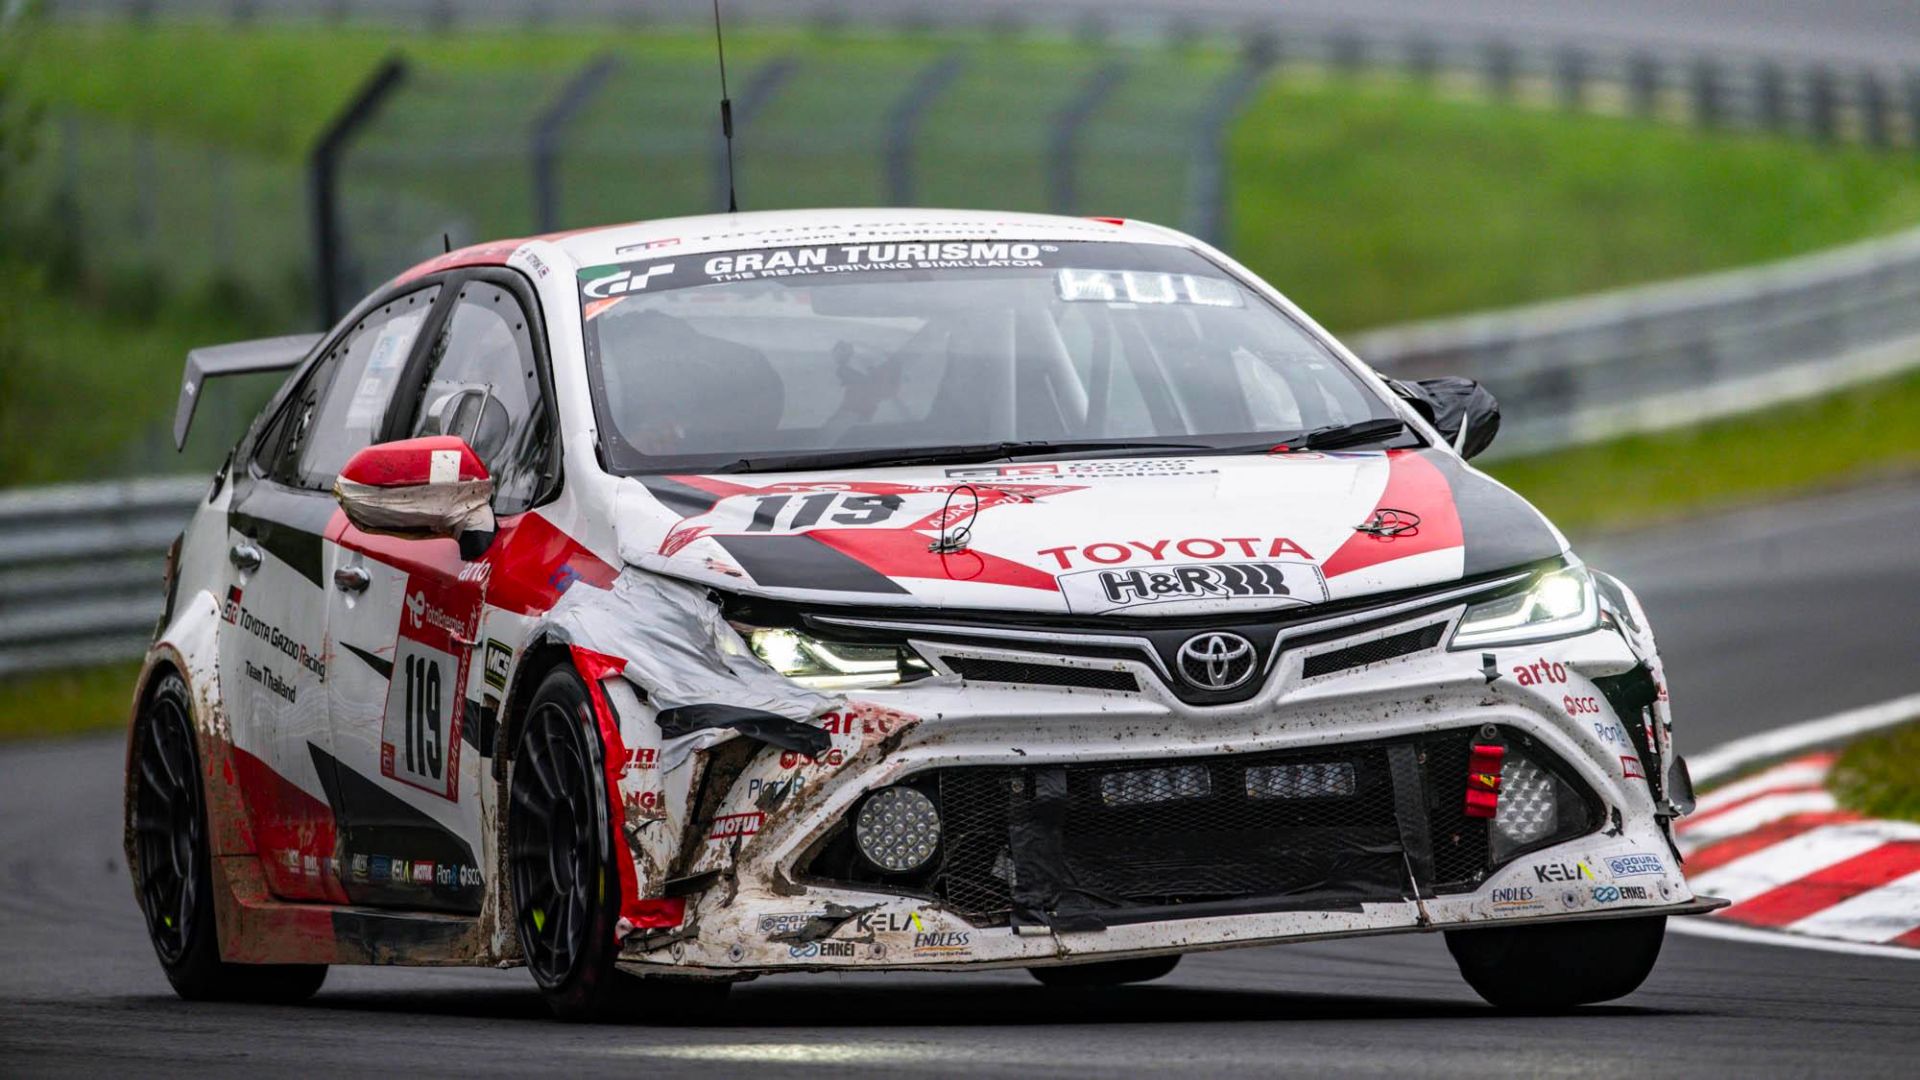 Toyota Corolla Altis in Nurburgring 24 Hours